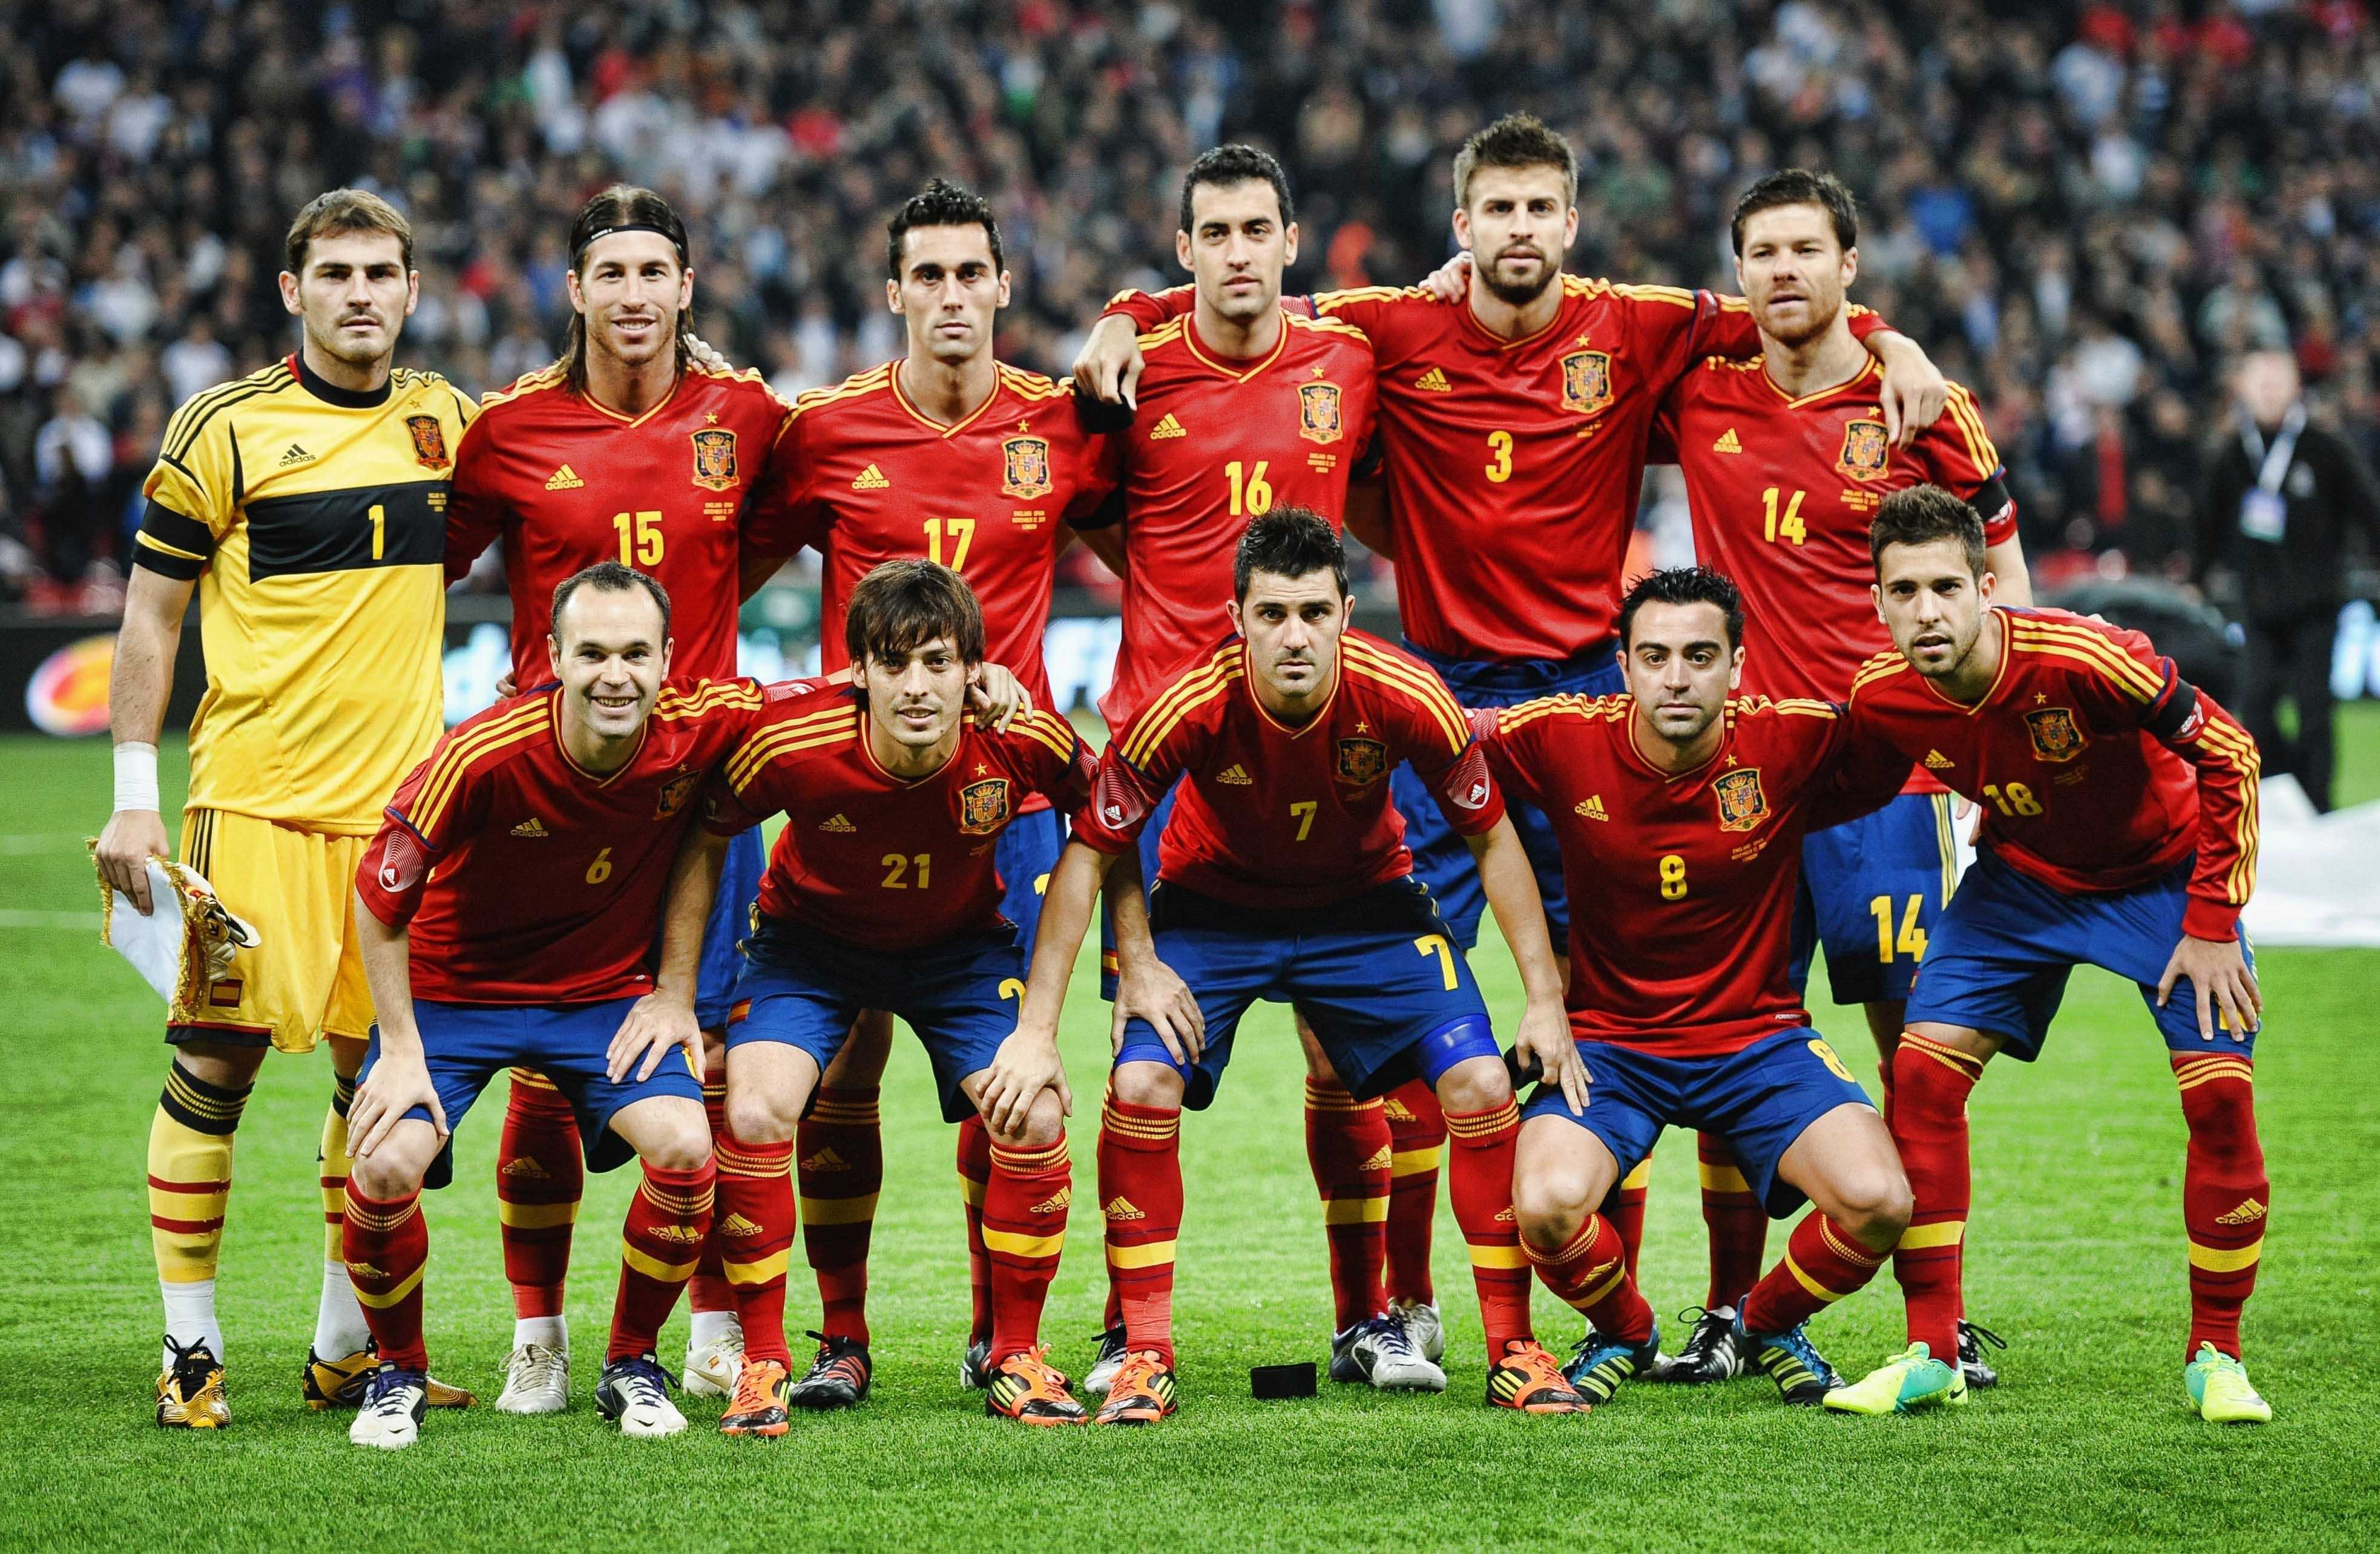 Image result for spain world cup 2018 squad